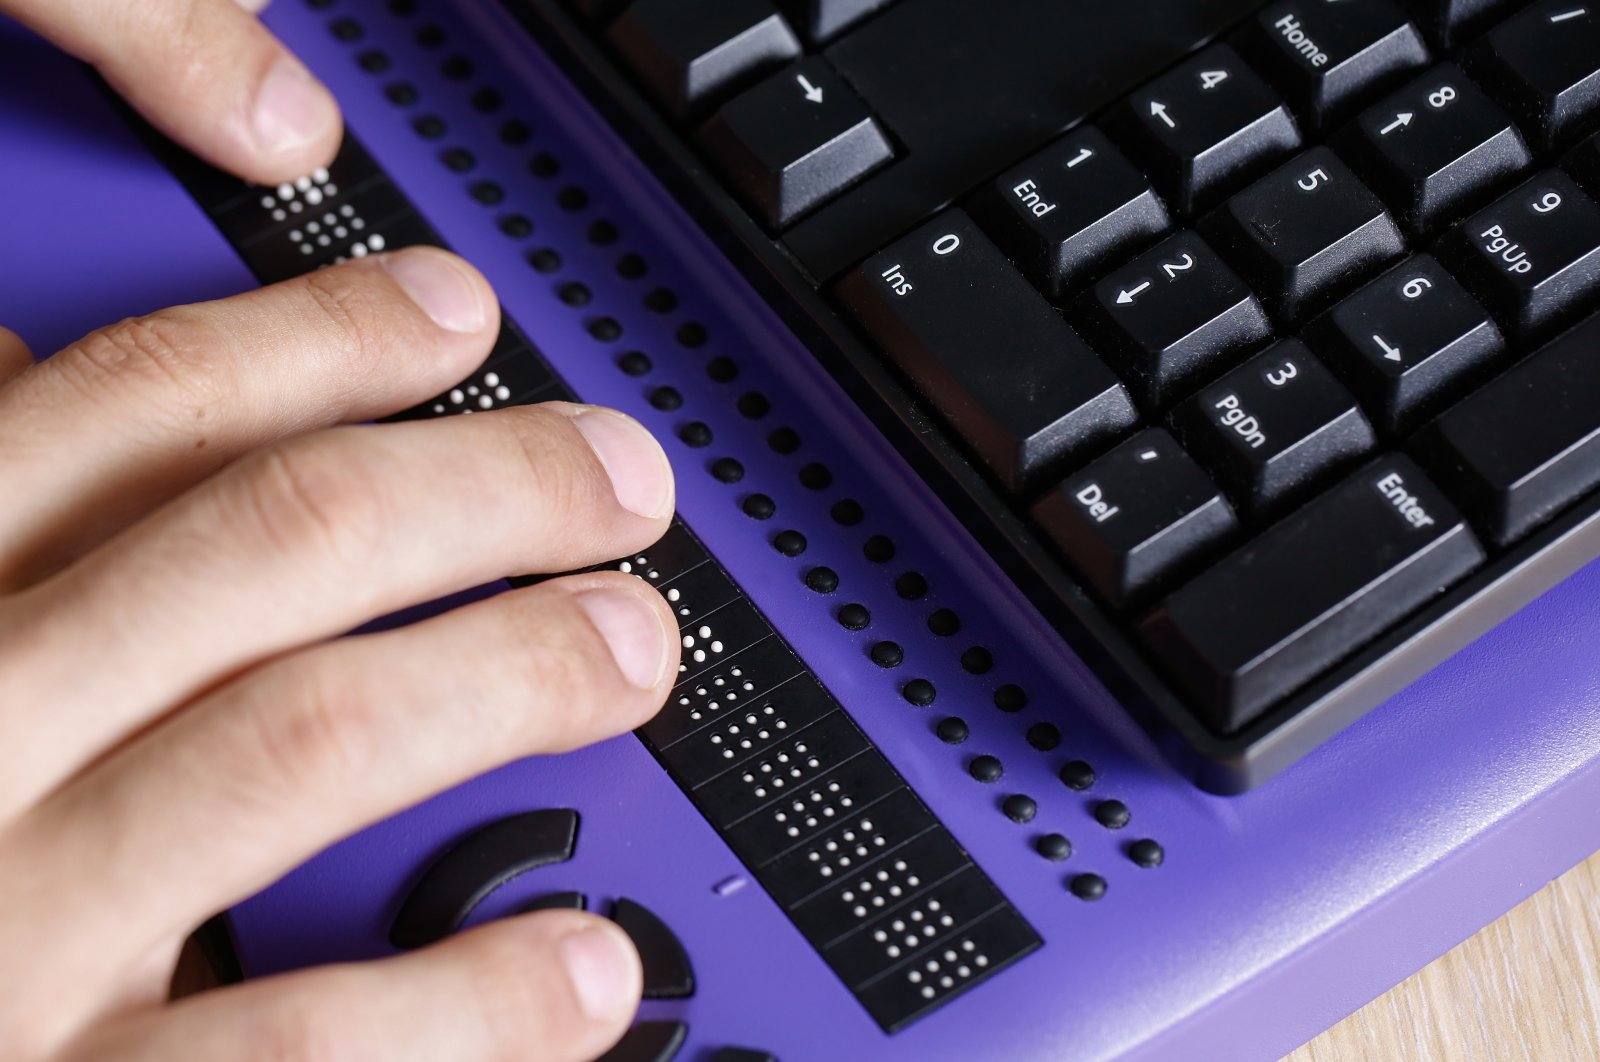 A visually impaired person using a computer with a braille keyboard is shown in this undated photo. (Shutterstock Photo)